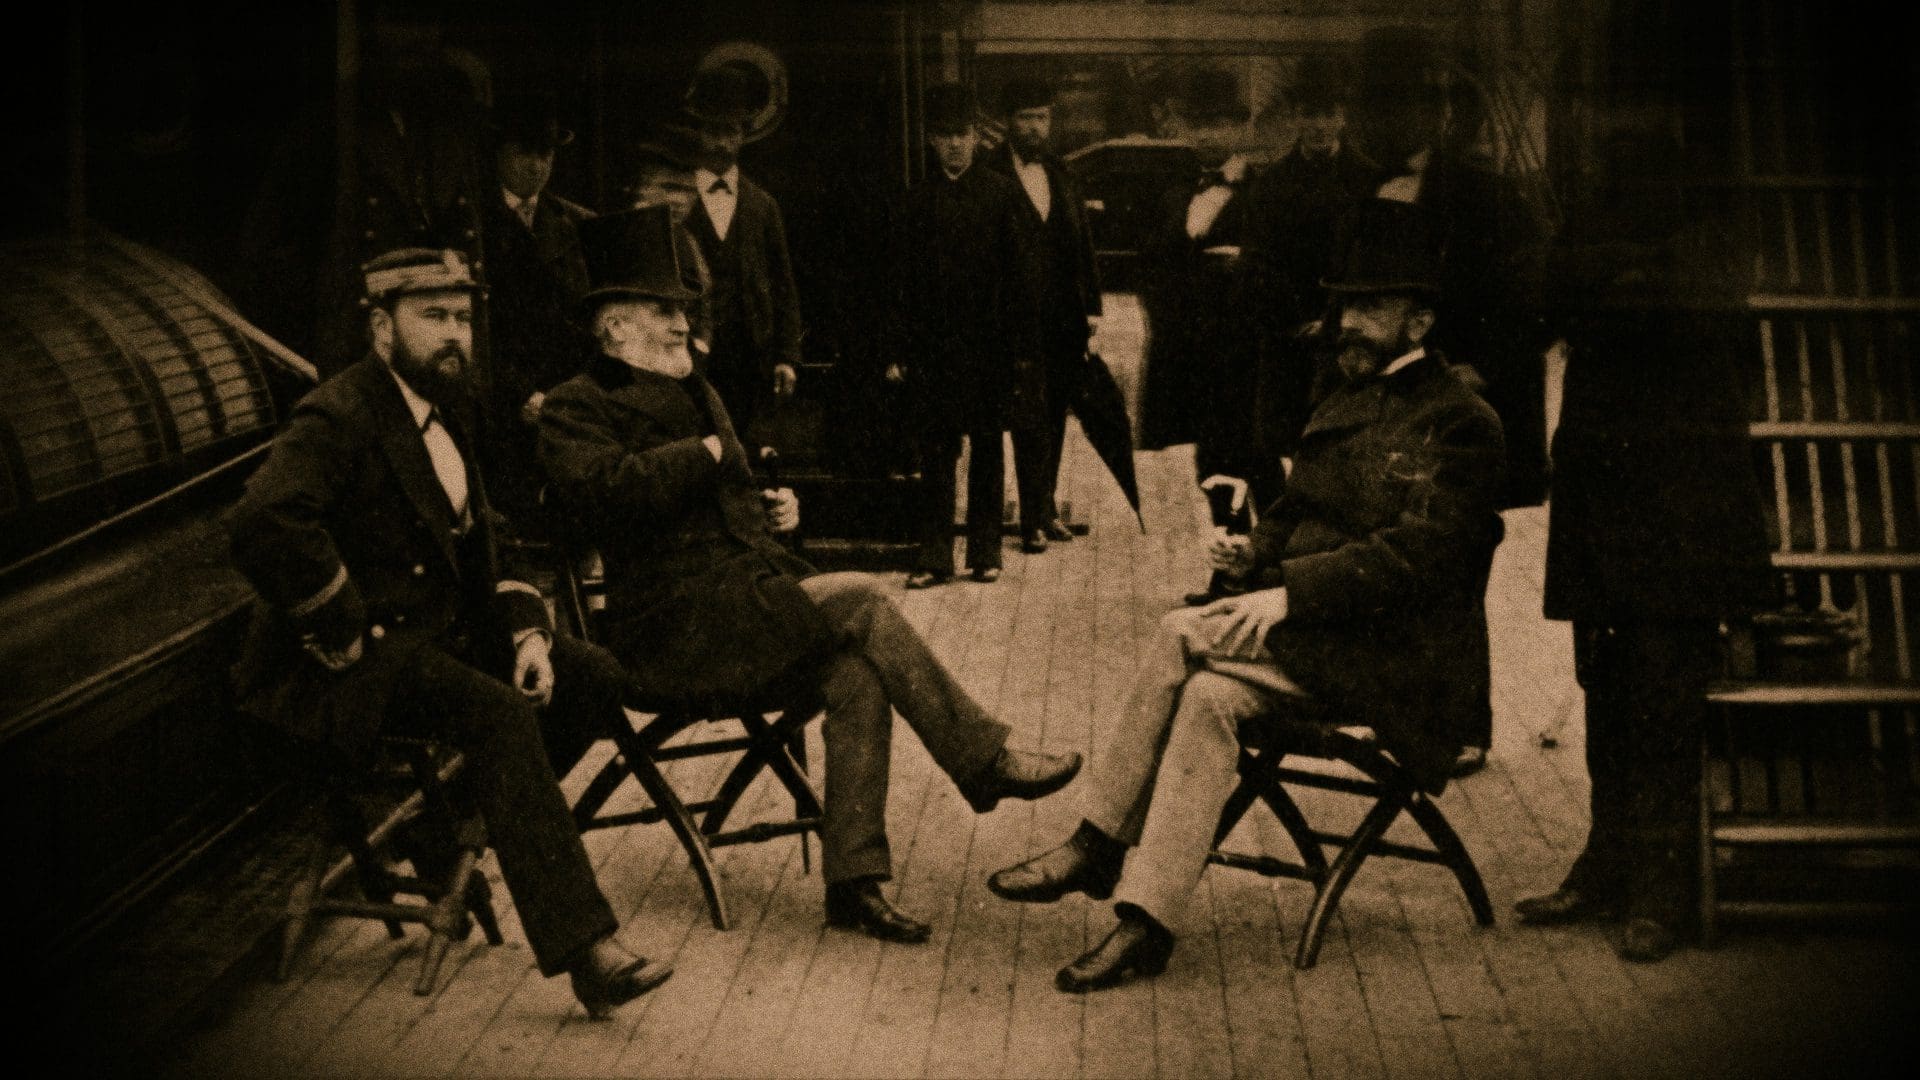 Sepia-toned historical photograph capturing Charles Lewis Tiffany and group of gentlemen in period attire, including top hats and suits, engaged in conversation while seated on folding chairs, likely depicting a scene from the late 19th or early 20th century.